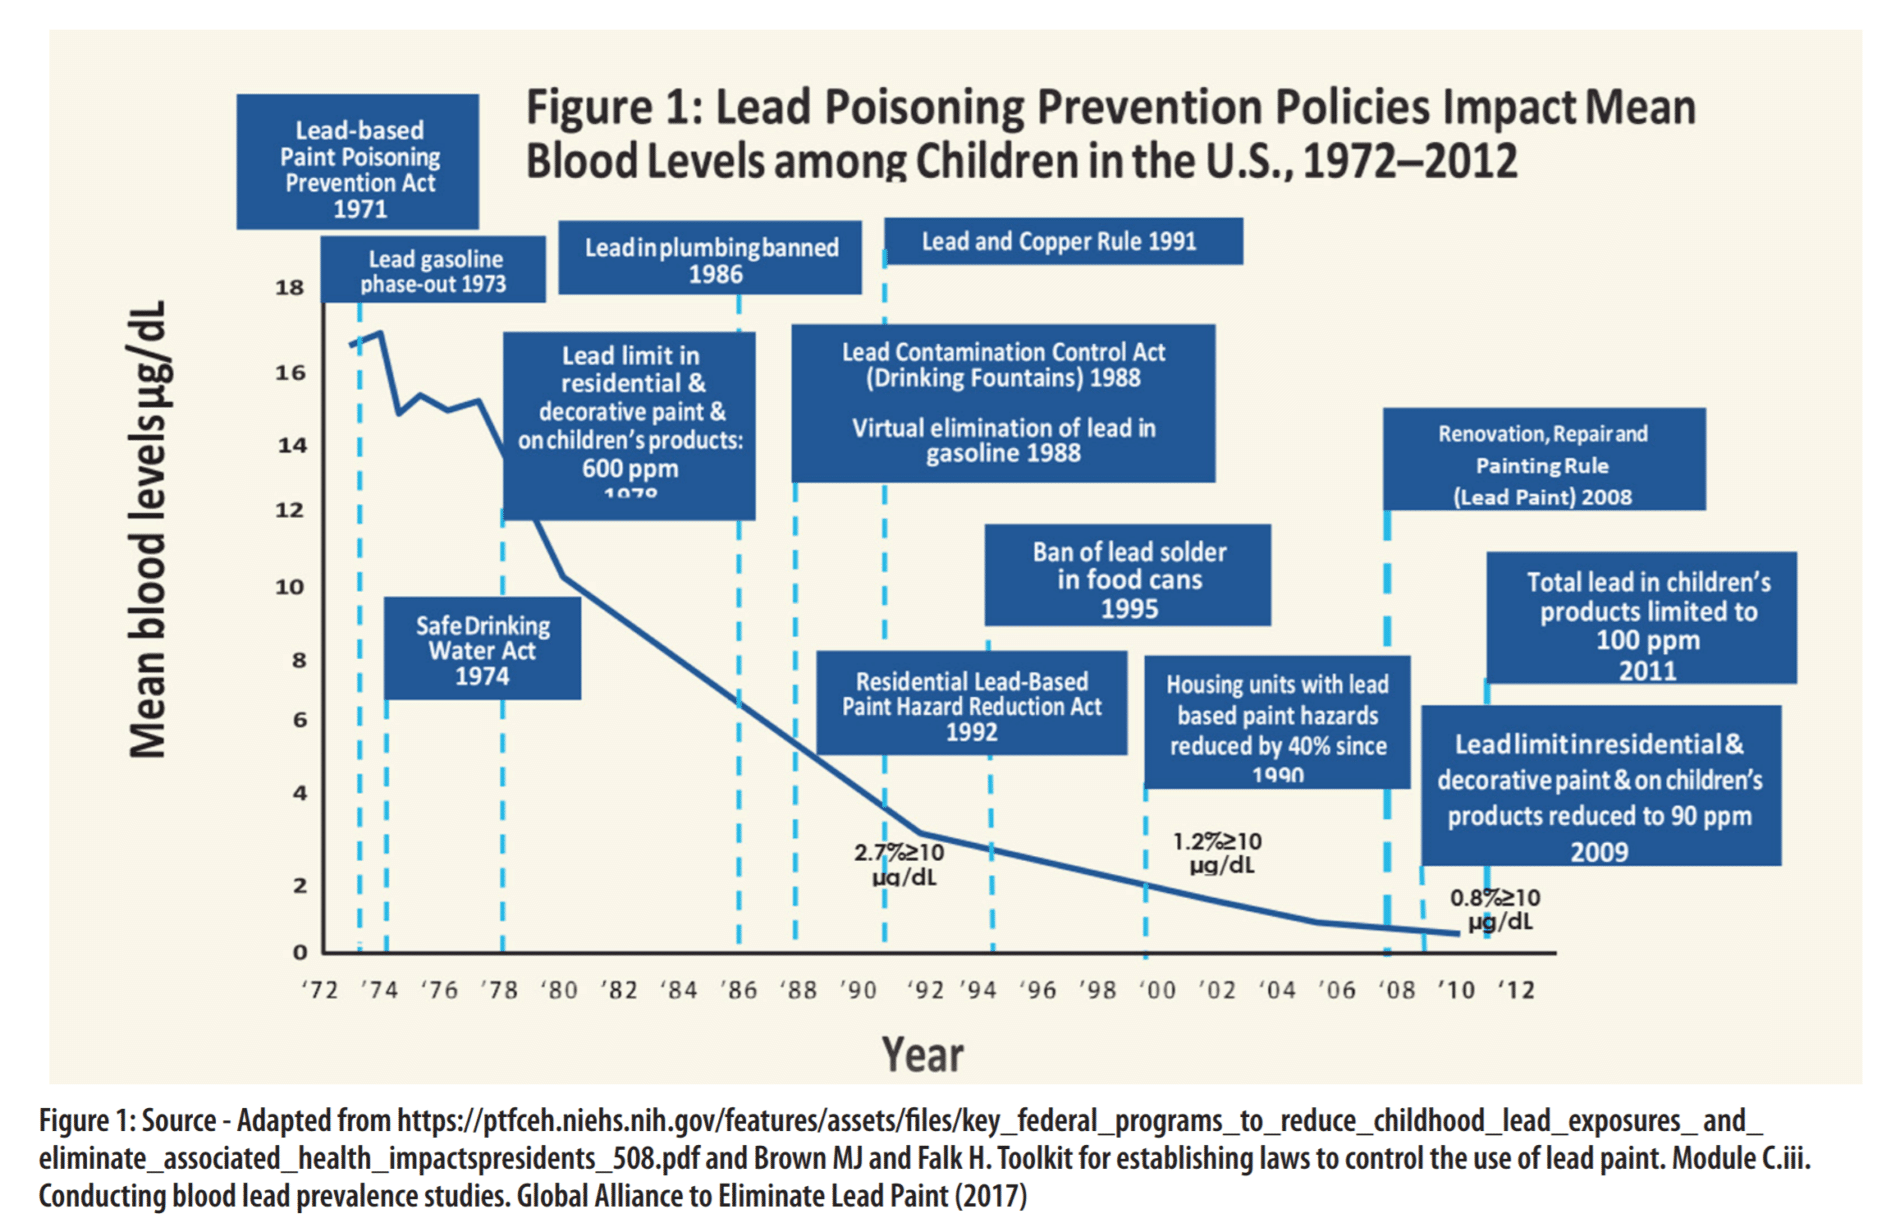 Lead Poisoning Prevention Policies Impact Mean Blood Levels Among Children in the U.S. 1972-2012